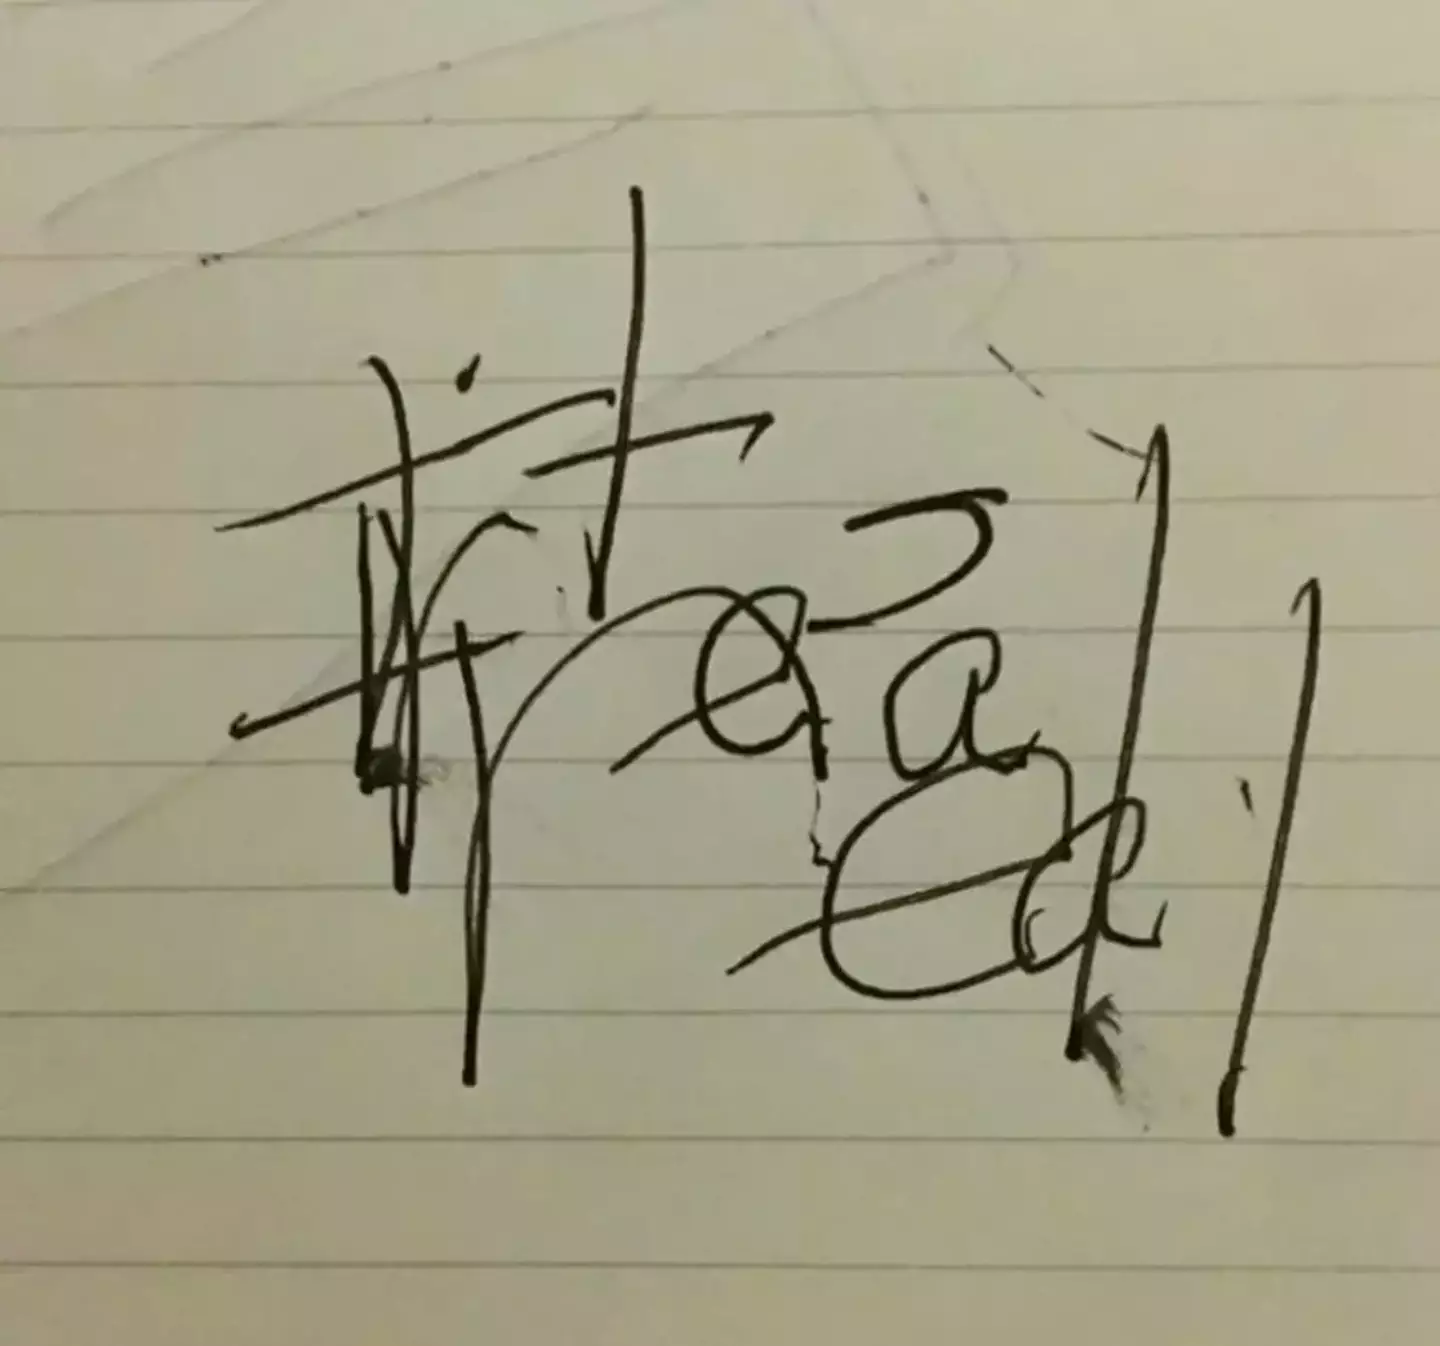 She scrawled the words 'it's real' when she woke up in the hospital.